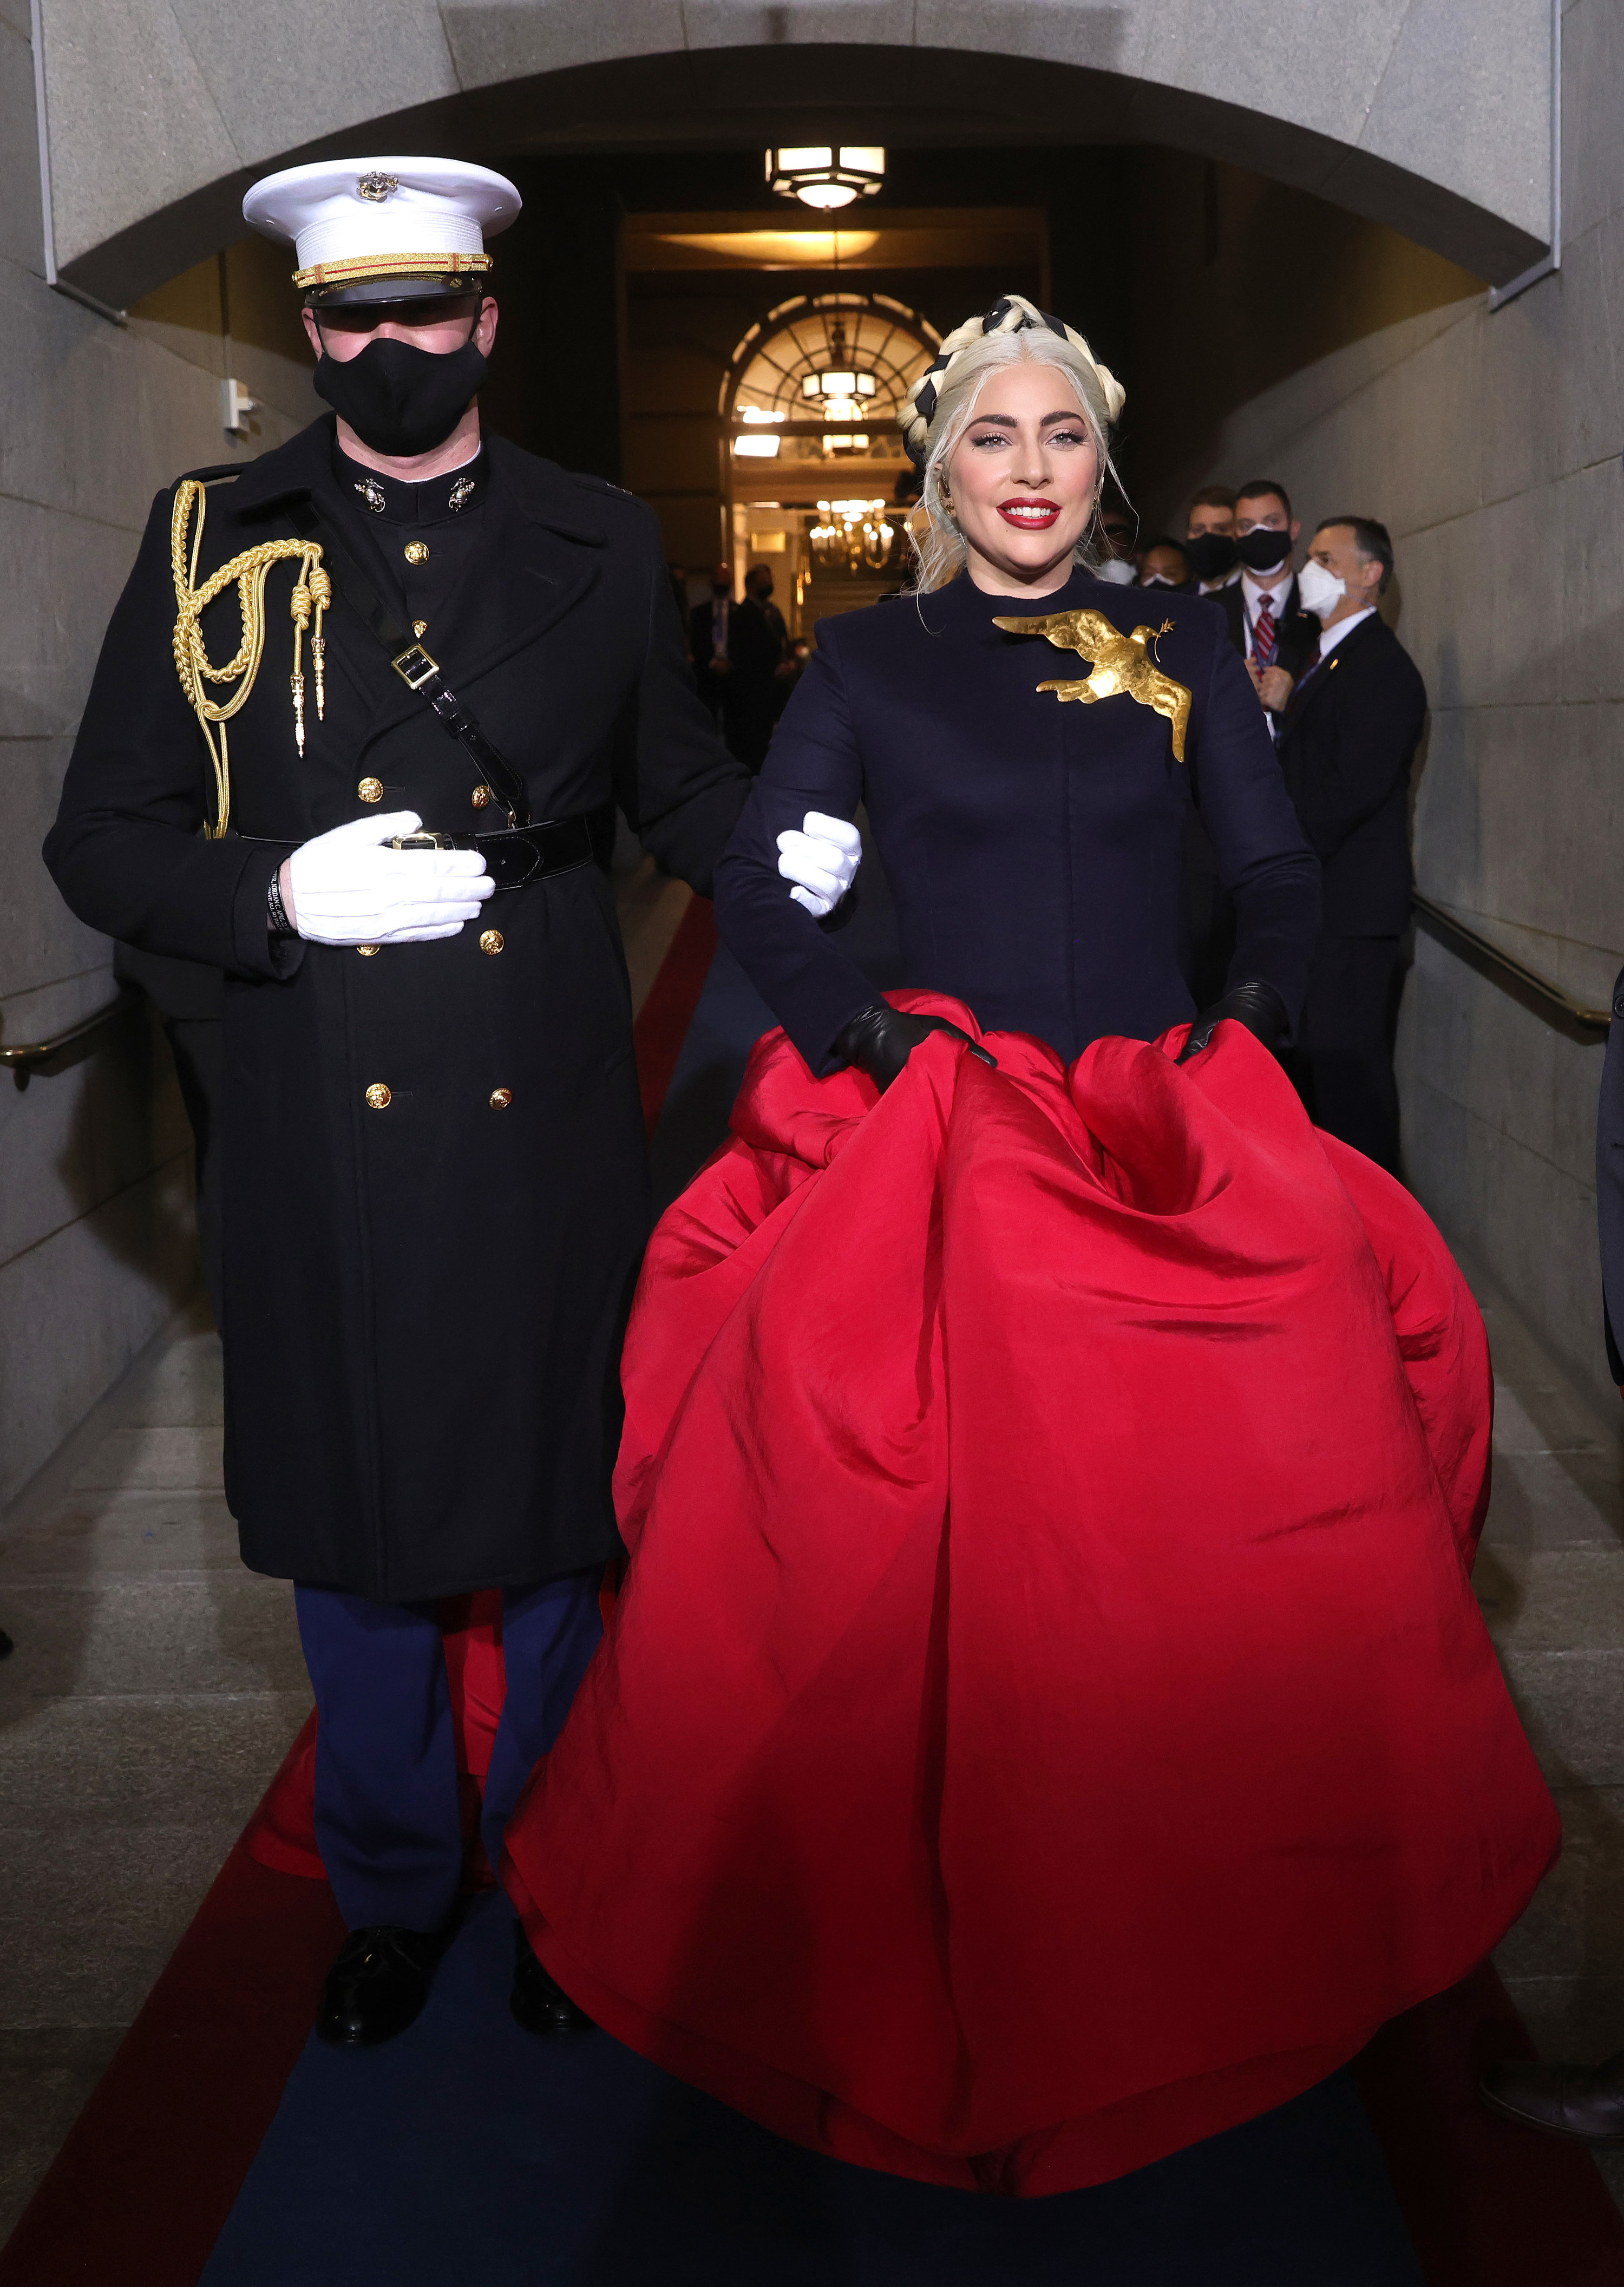 Gaga being escorted to the inauguration podium to perform the national anthem